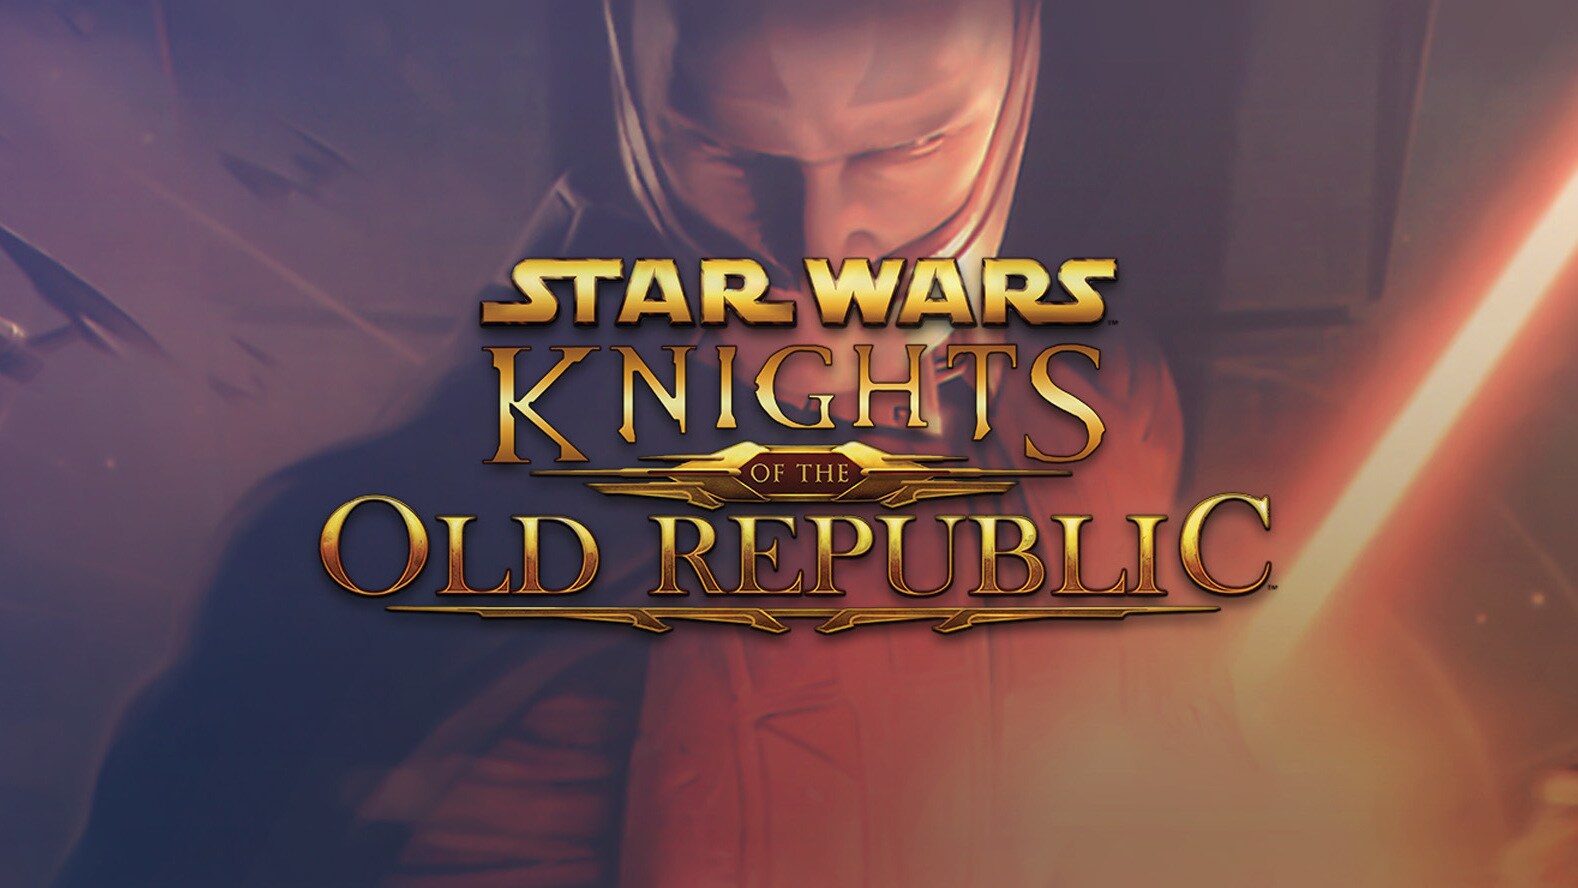 Star Wars: Knights of the Old Republic on GOG.com